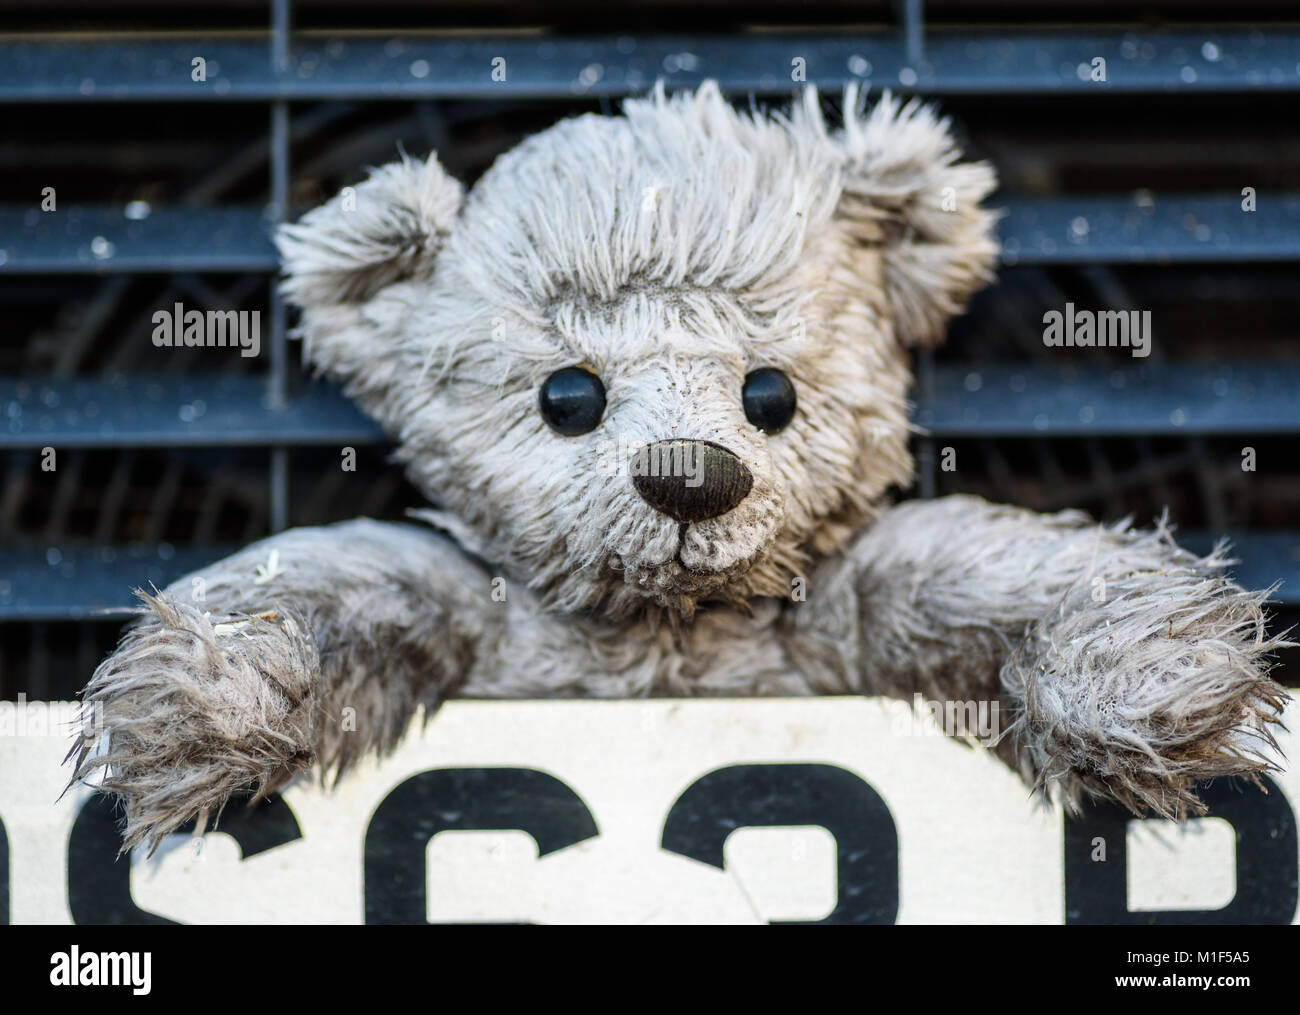 An old teddy bear on the front of a waste collection vehicle. Stock Photo